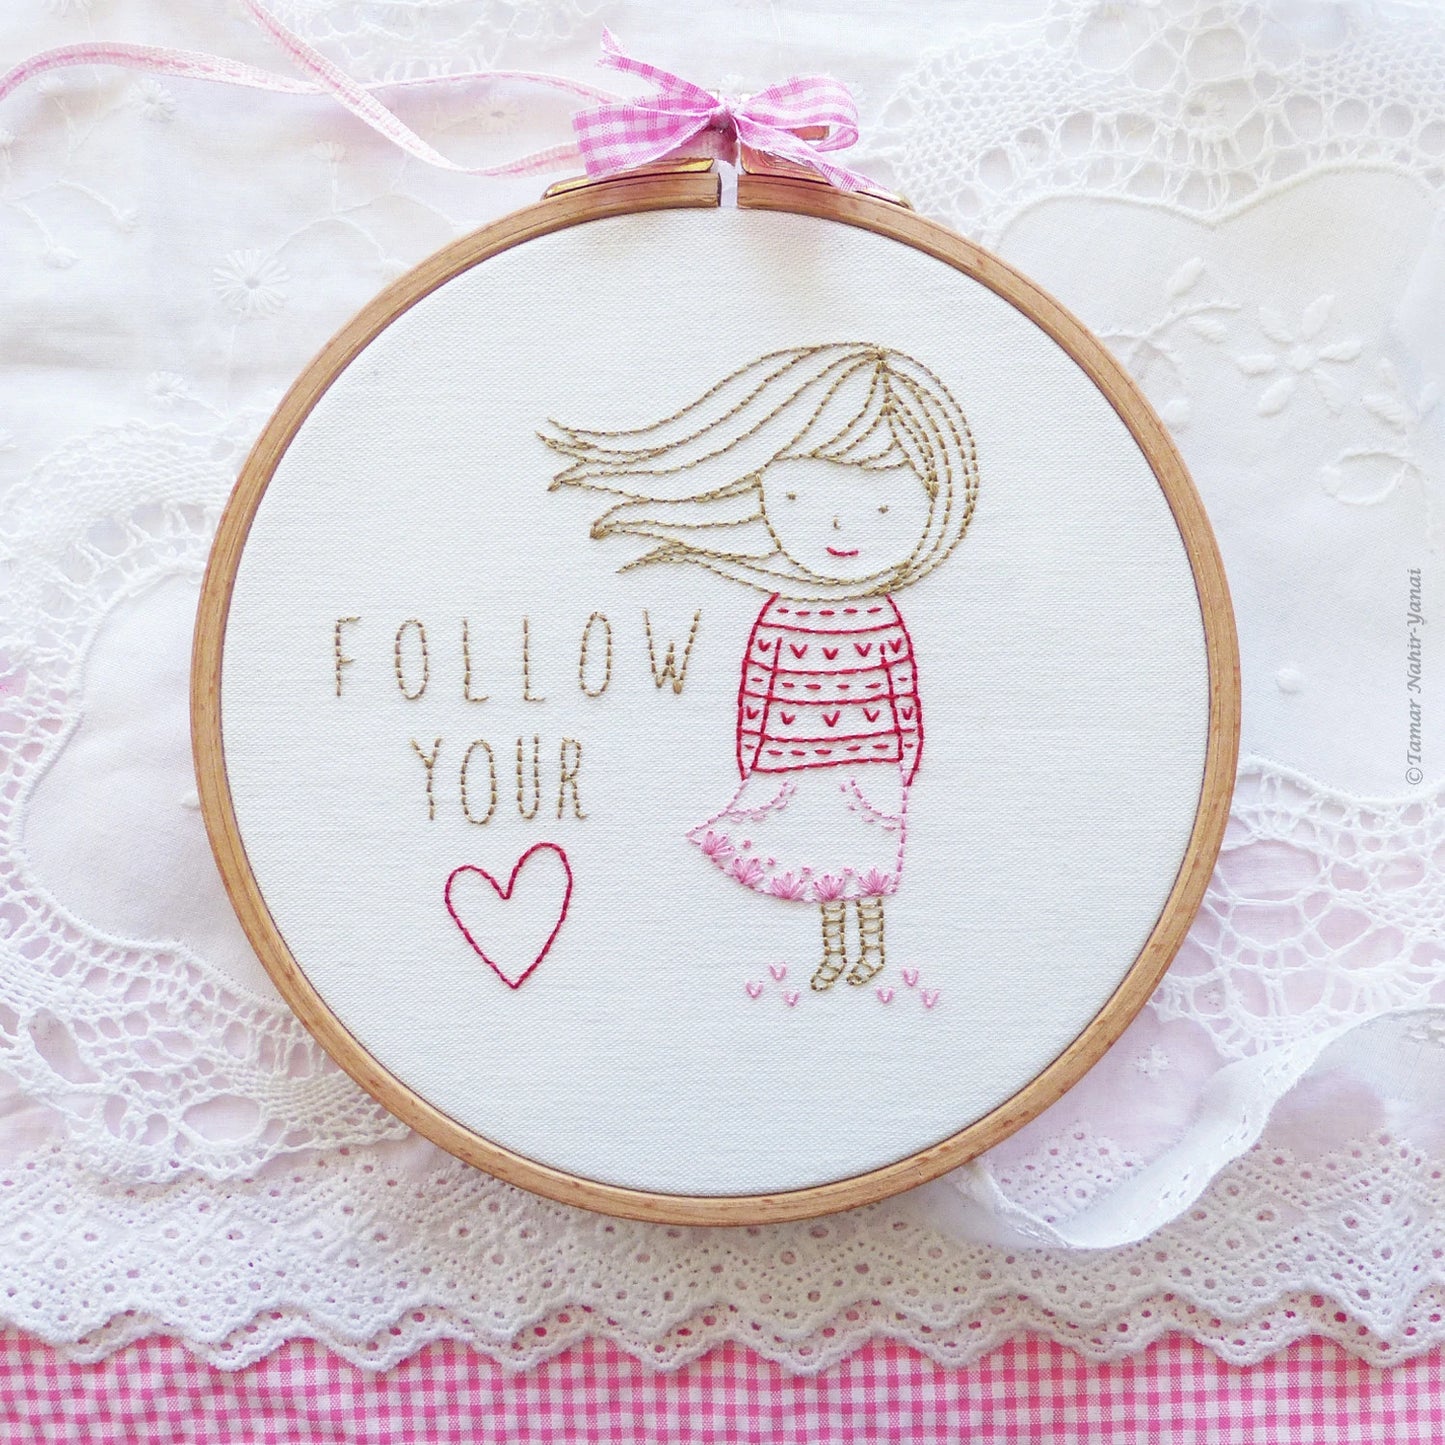 Follow Your Heart embroidery kit